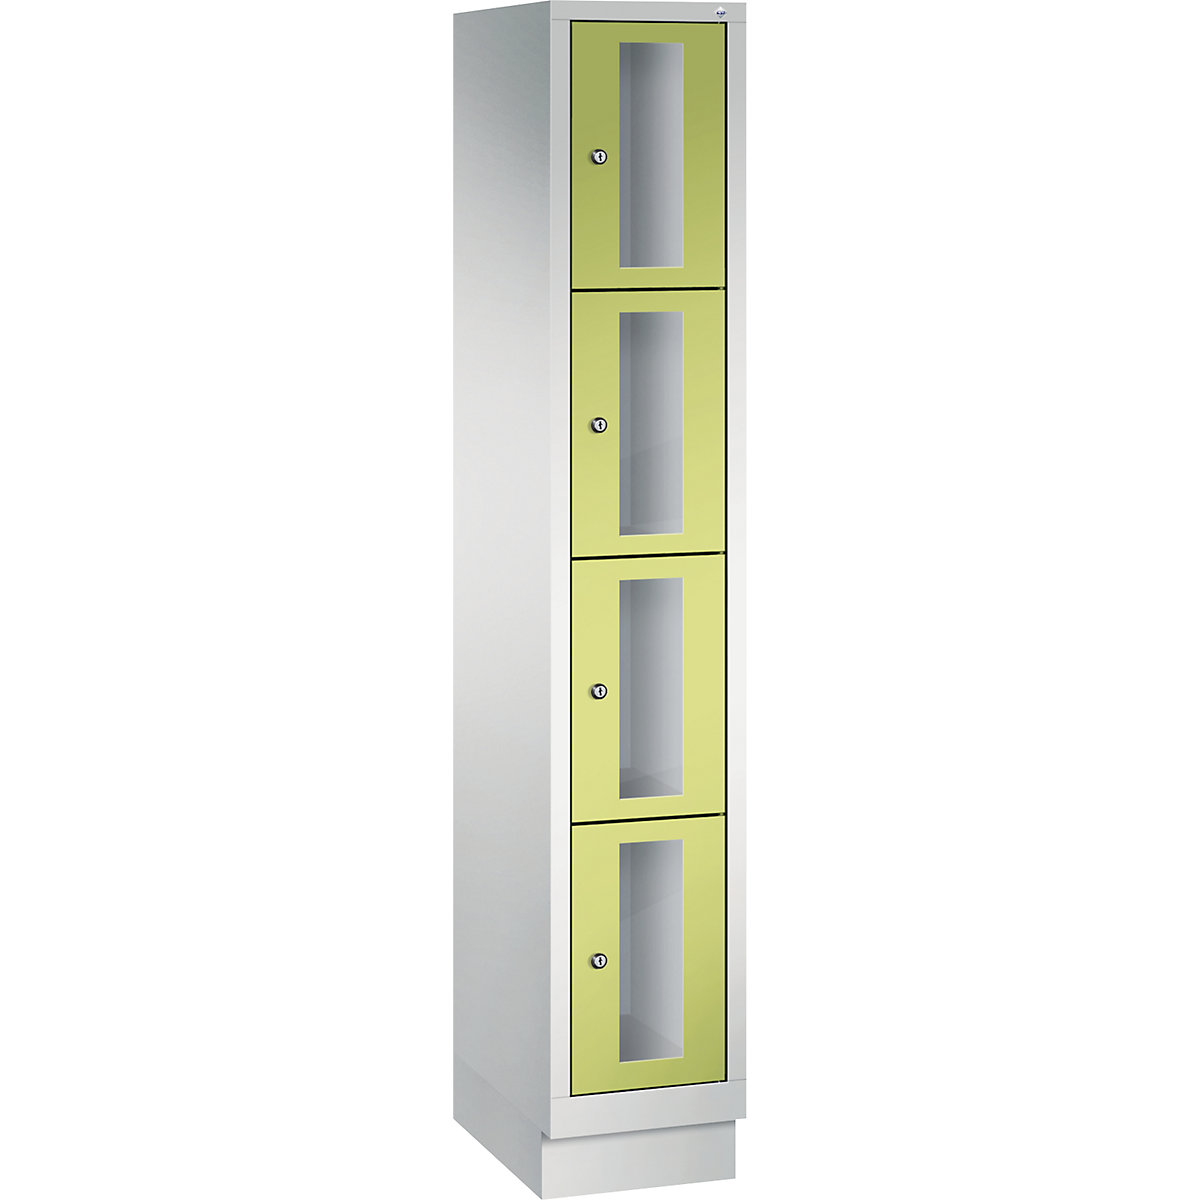 C+P – CLASSIC locker unit, compartment height 375 mm, with plinth, 4 compartments, width 320 mm, viridian green door